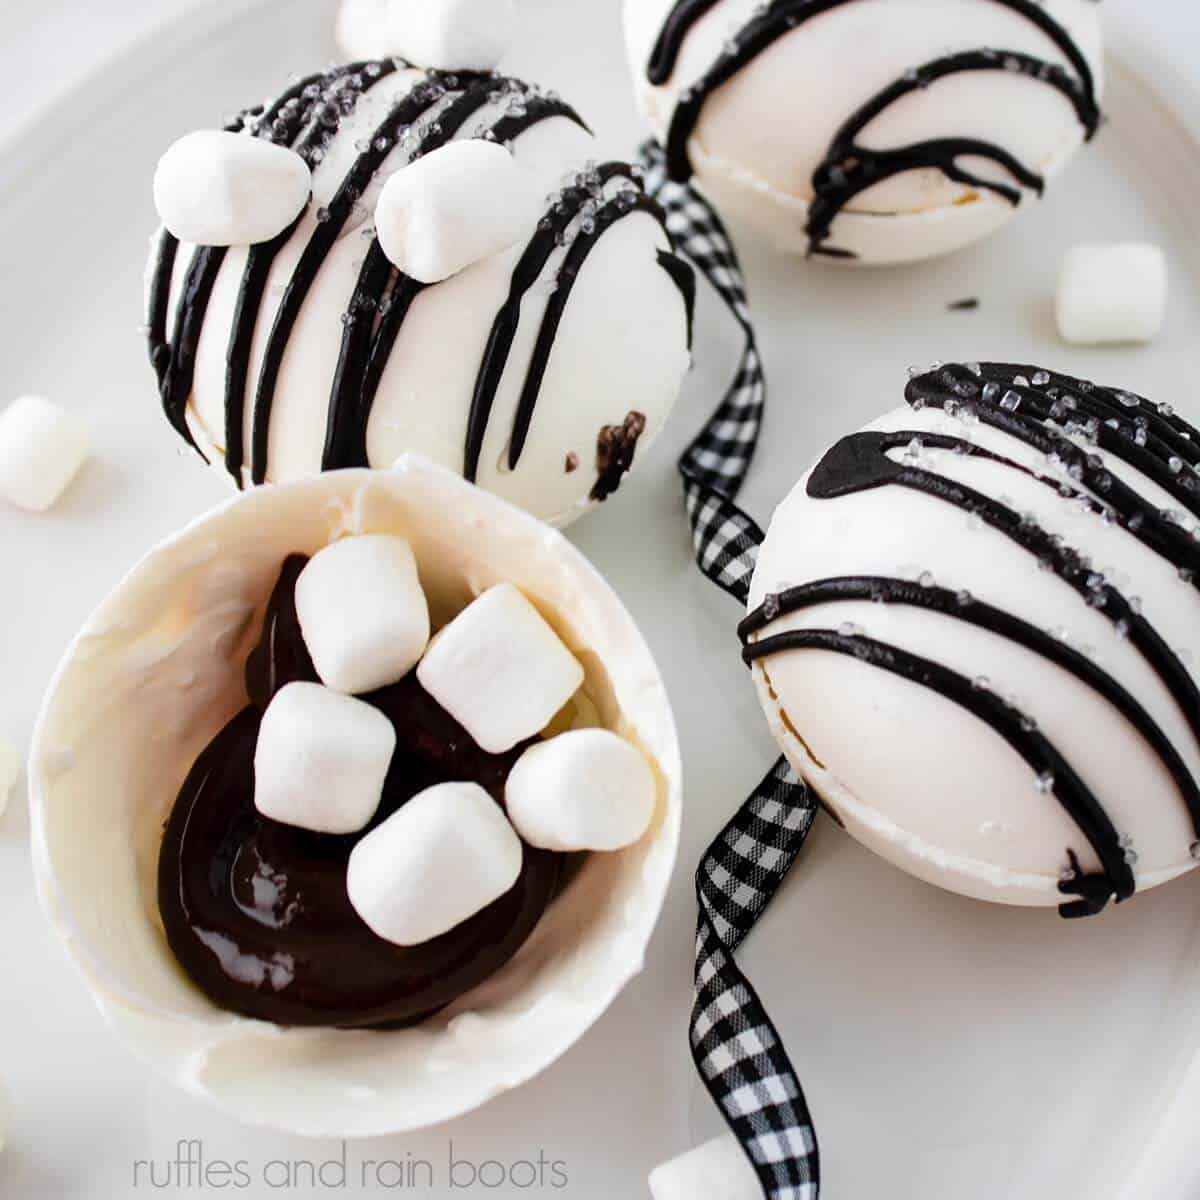 Square image of an open chocolate bomb showing Baileys Irish cream ganache recipe, mini marshmallows, and three completed coffee bombs on a white plate.